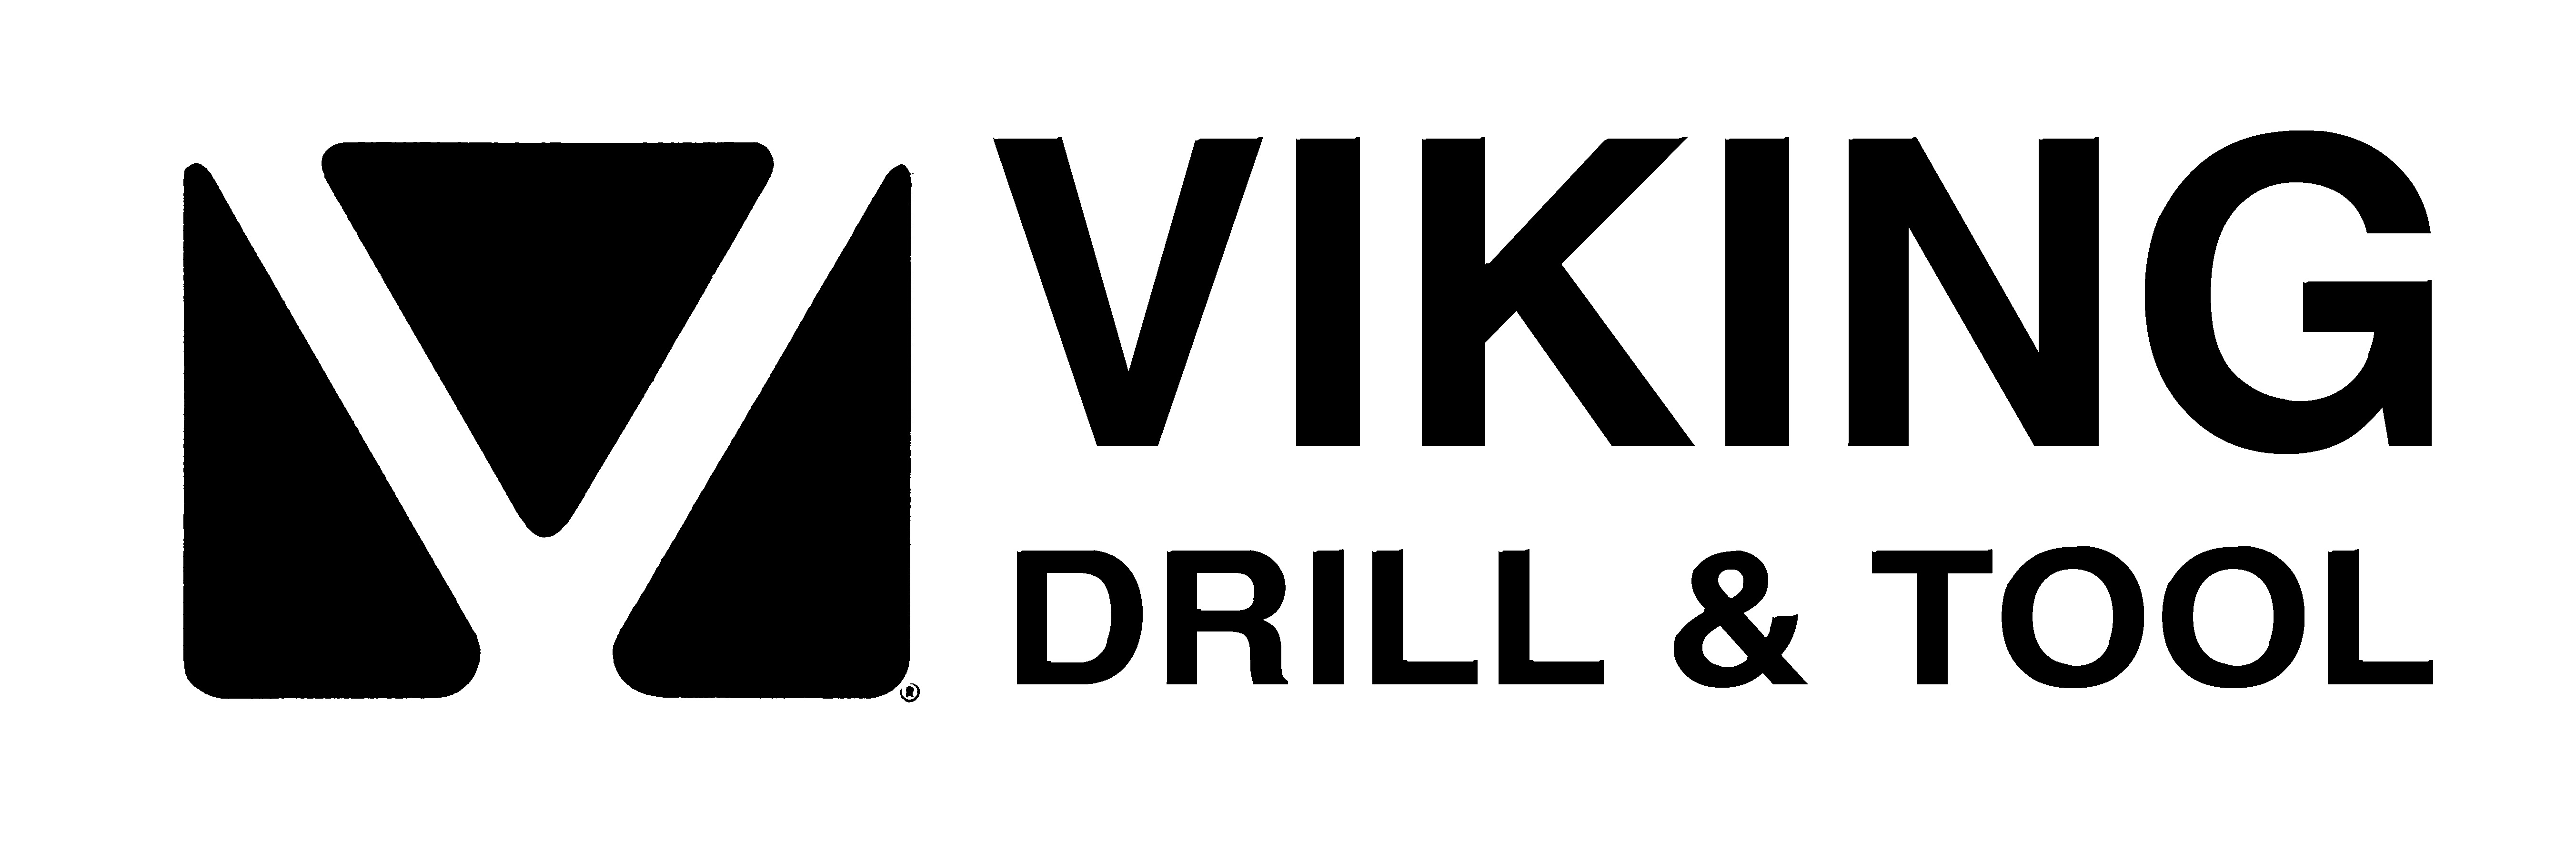 This product's manufacturer is Viking Drill & Tool